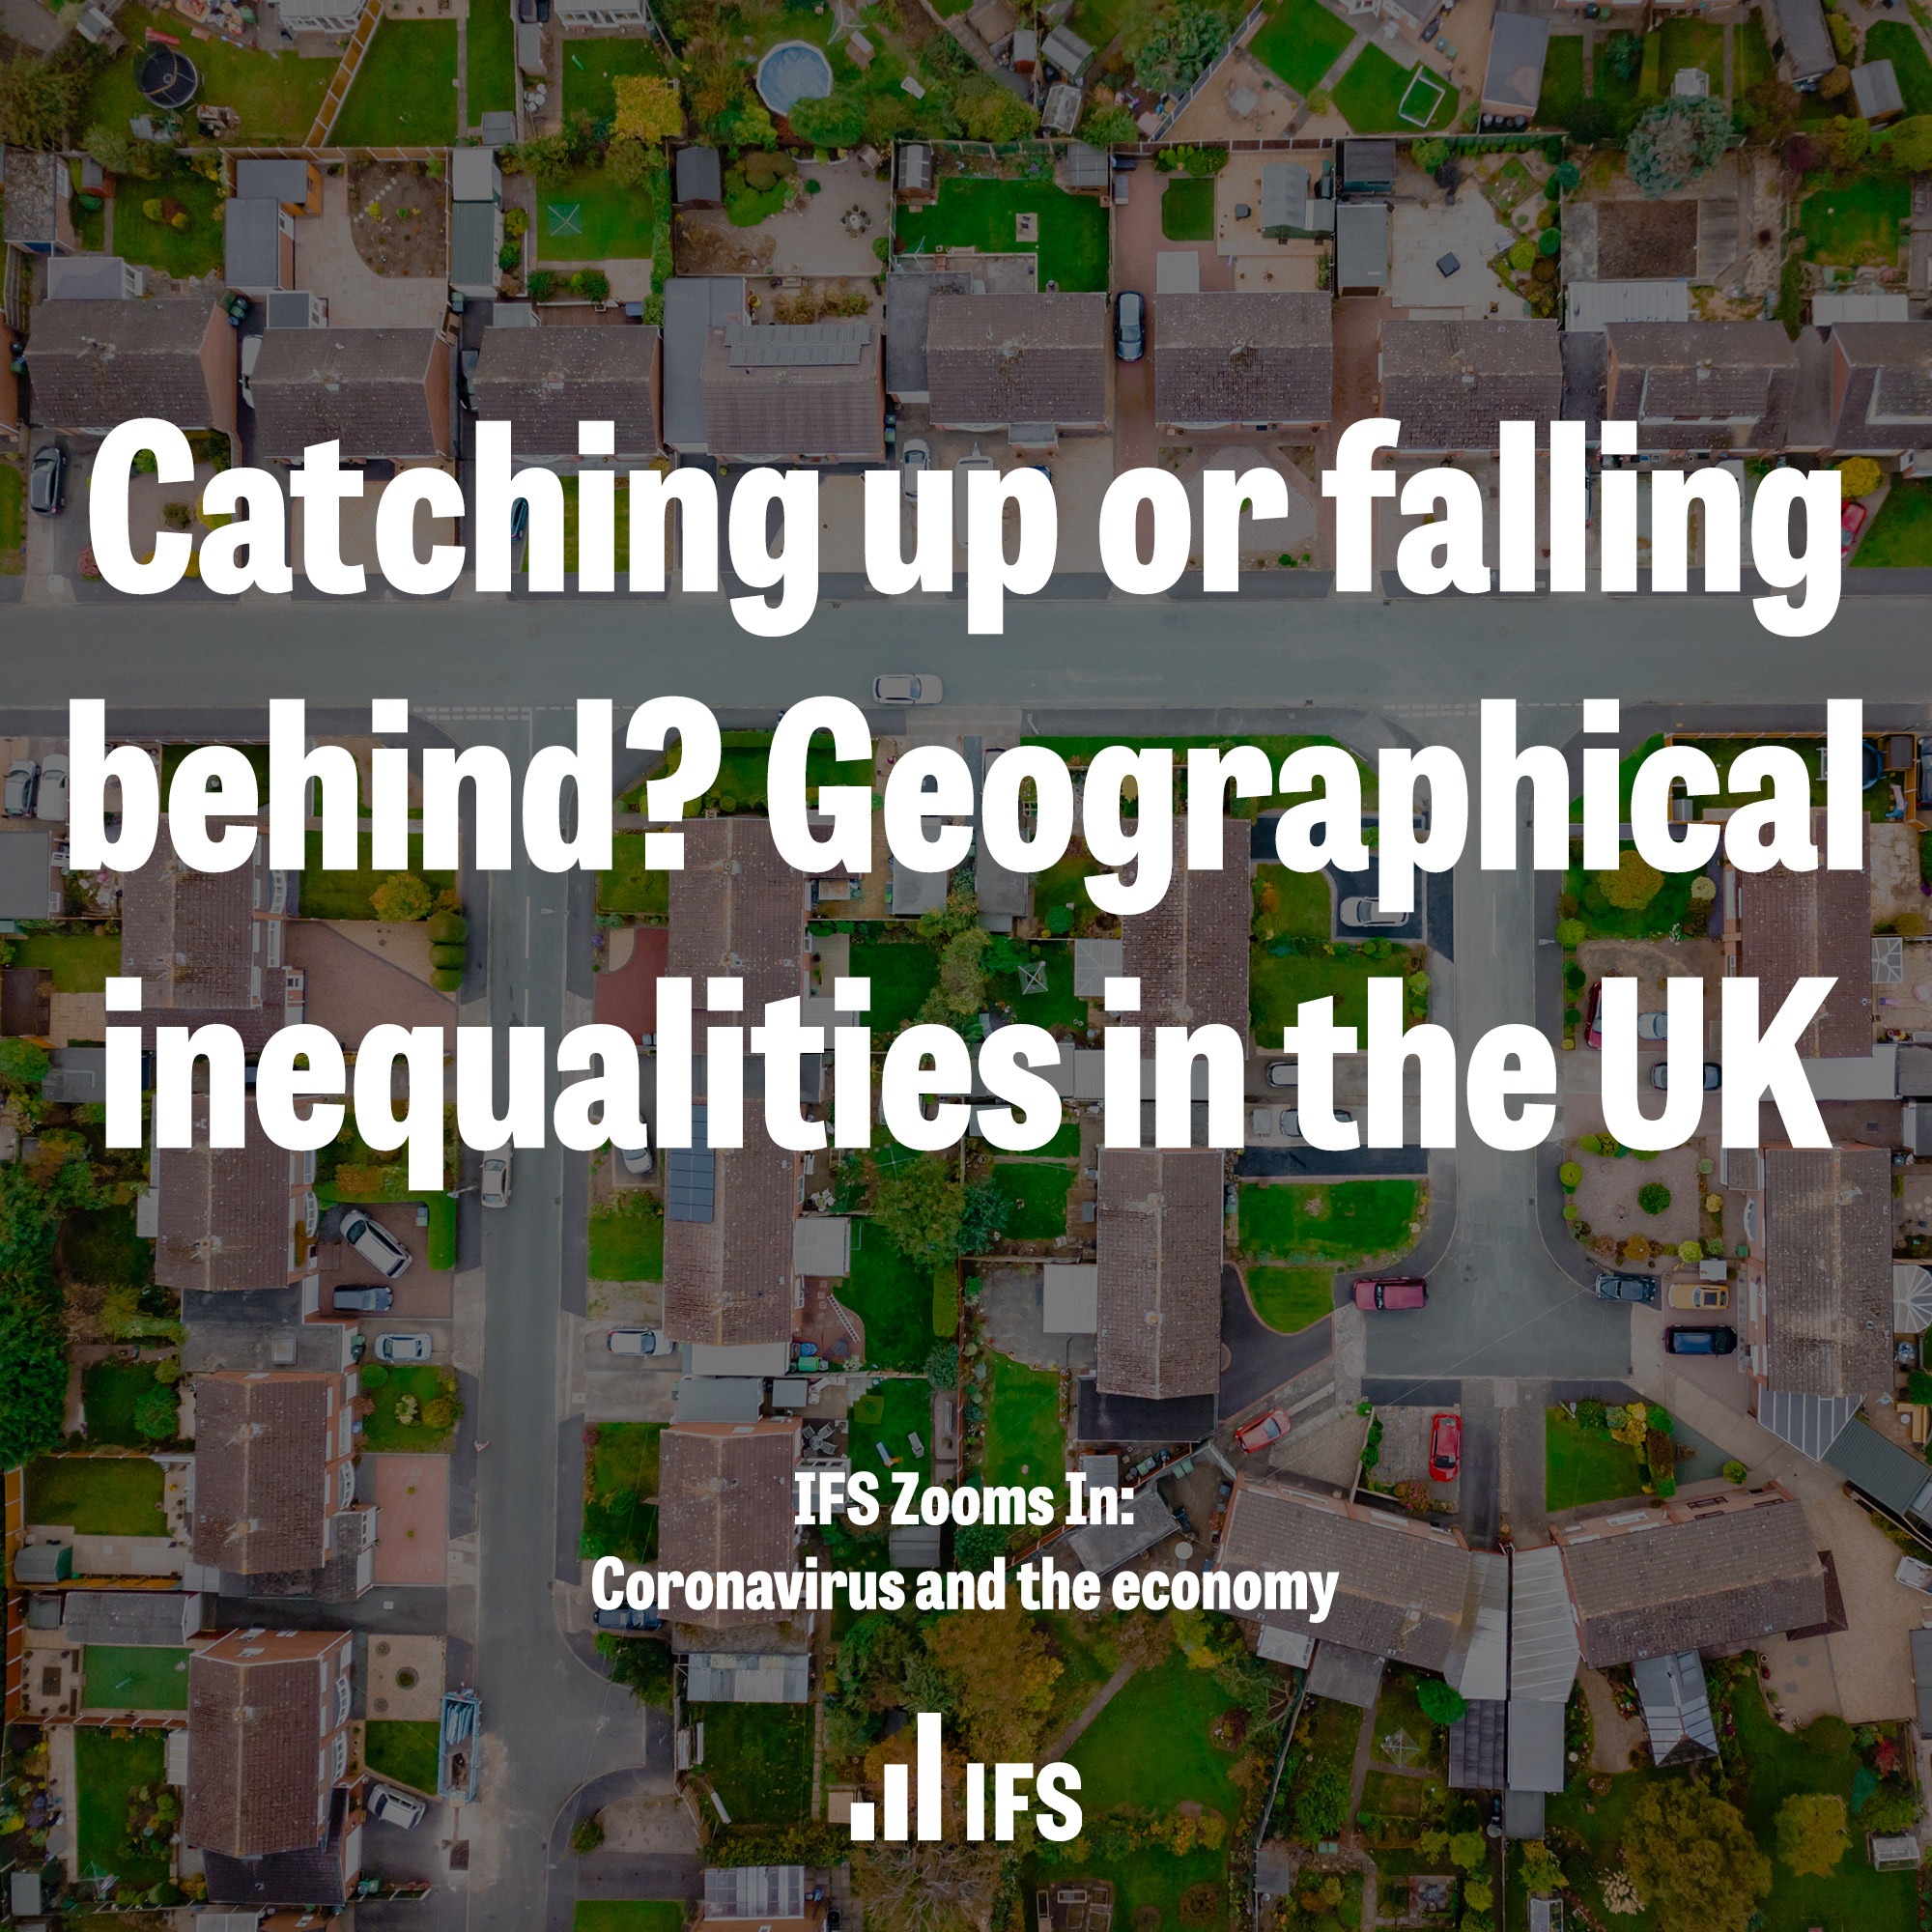 Catching up or falling behind? Geographical inequalities in the UK